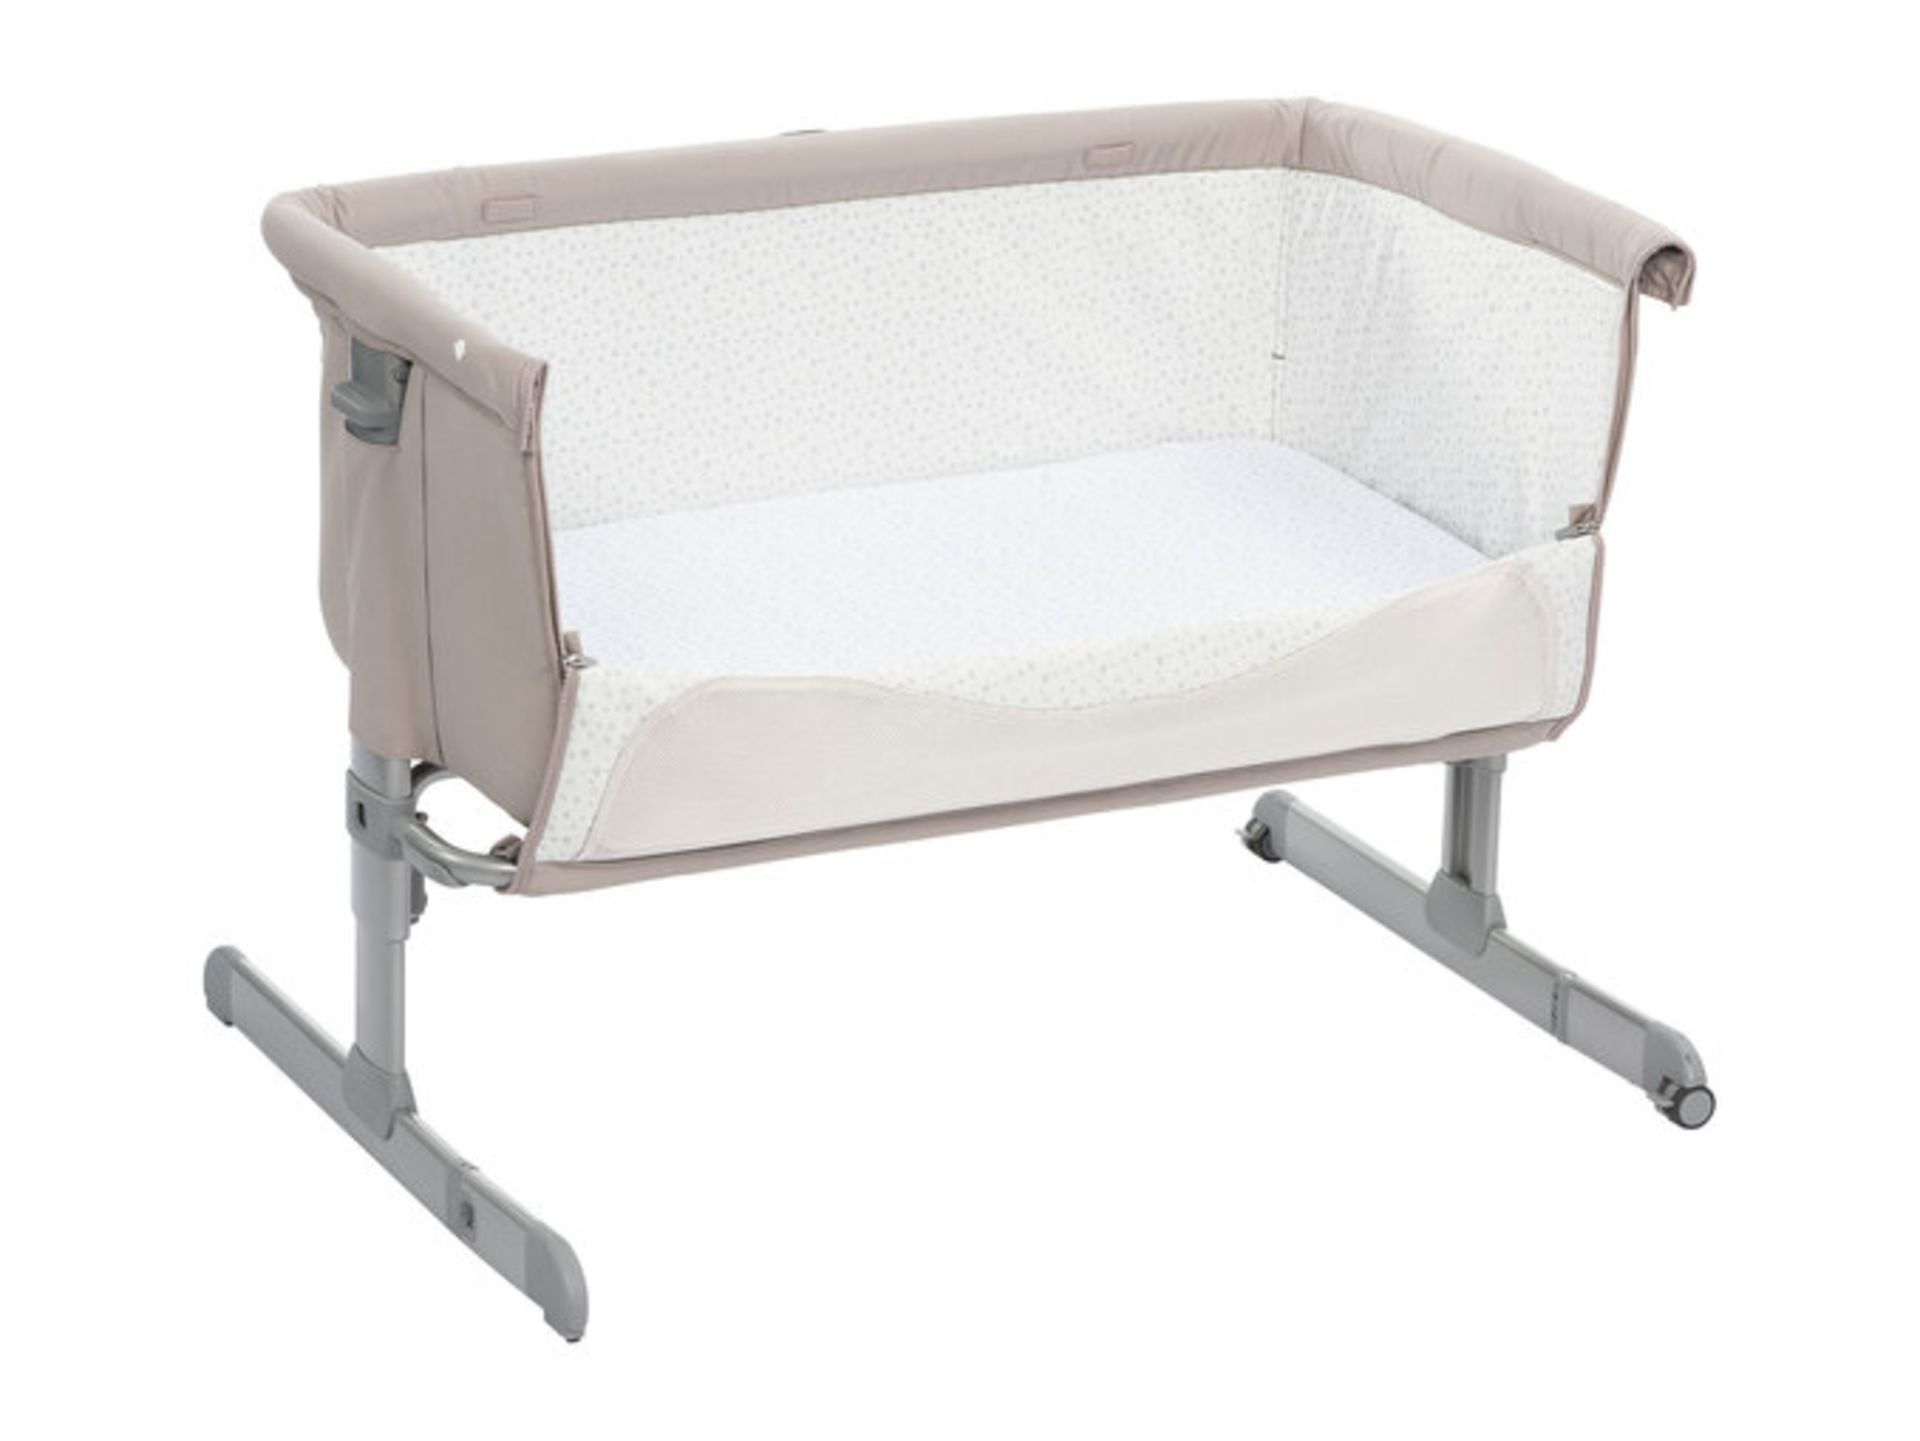 1 x Chicco Next2me Chick to Chick Bedside Baby Crib - Brand New 2019 Sealed Stock - Includes - Image 9 of 10